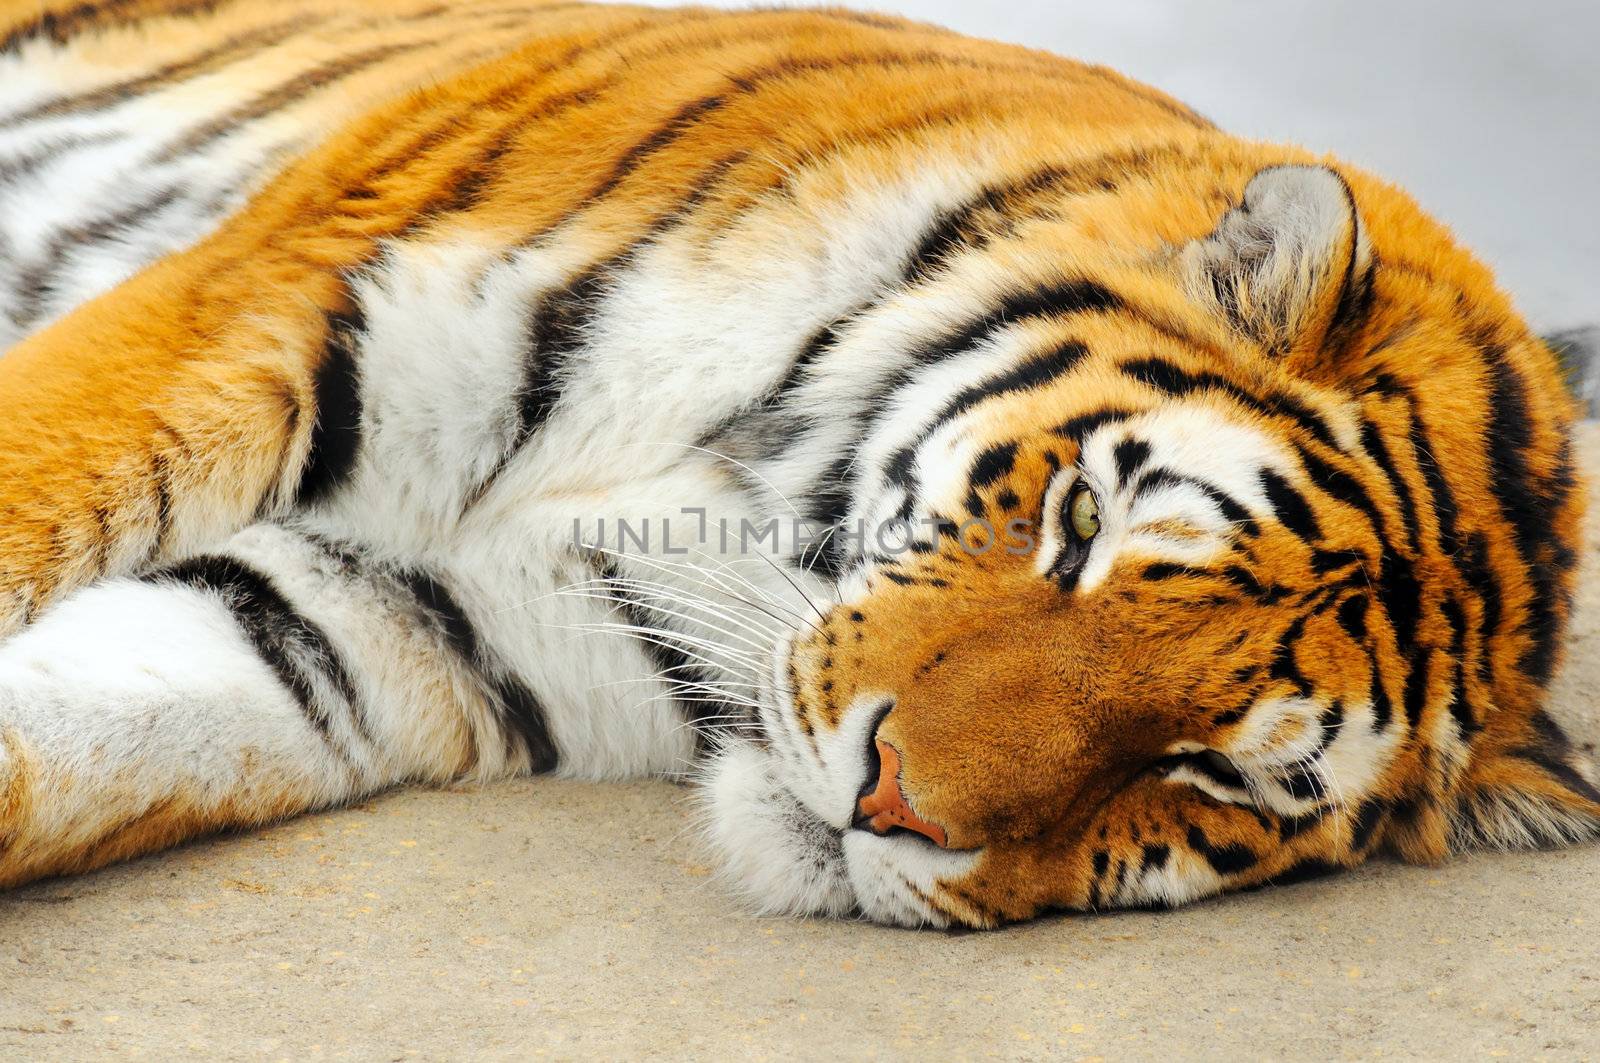 Beautiful and poweful giant tiger taking a nap, great details and colors.